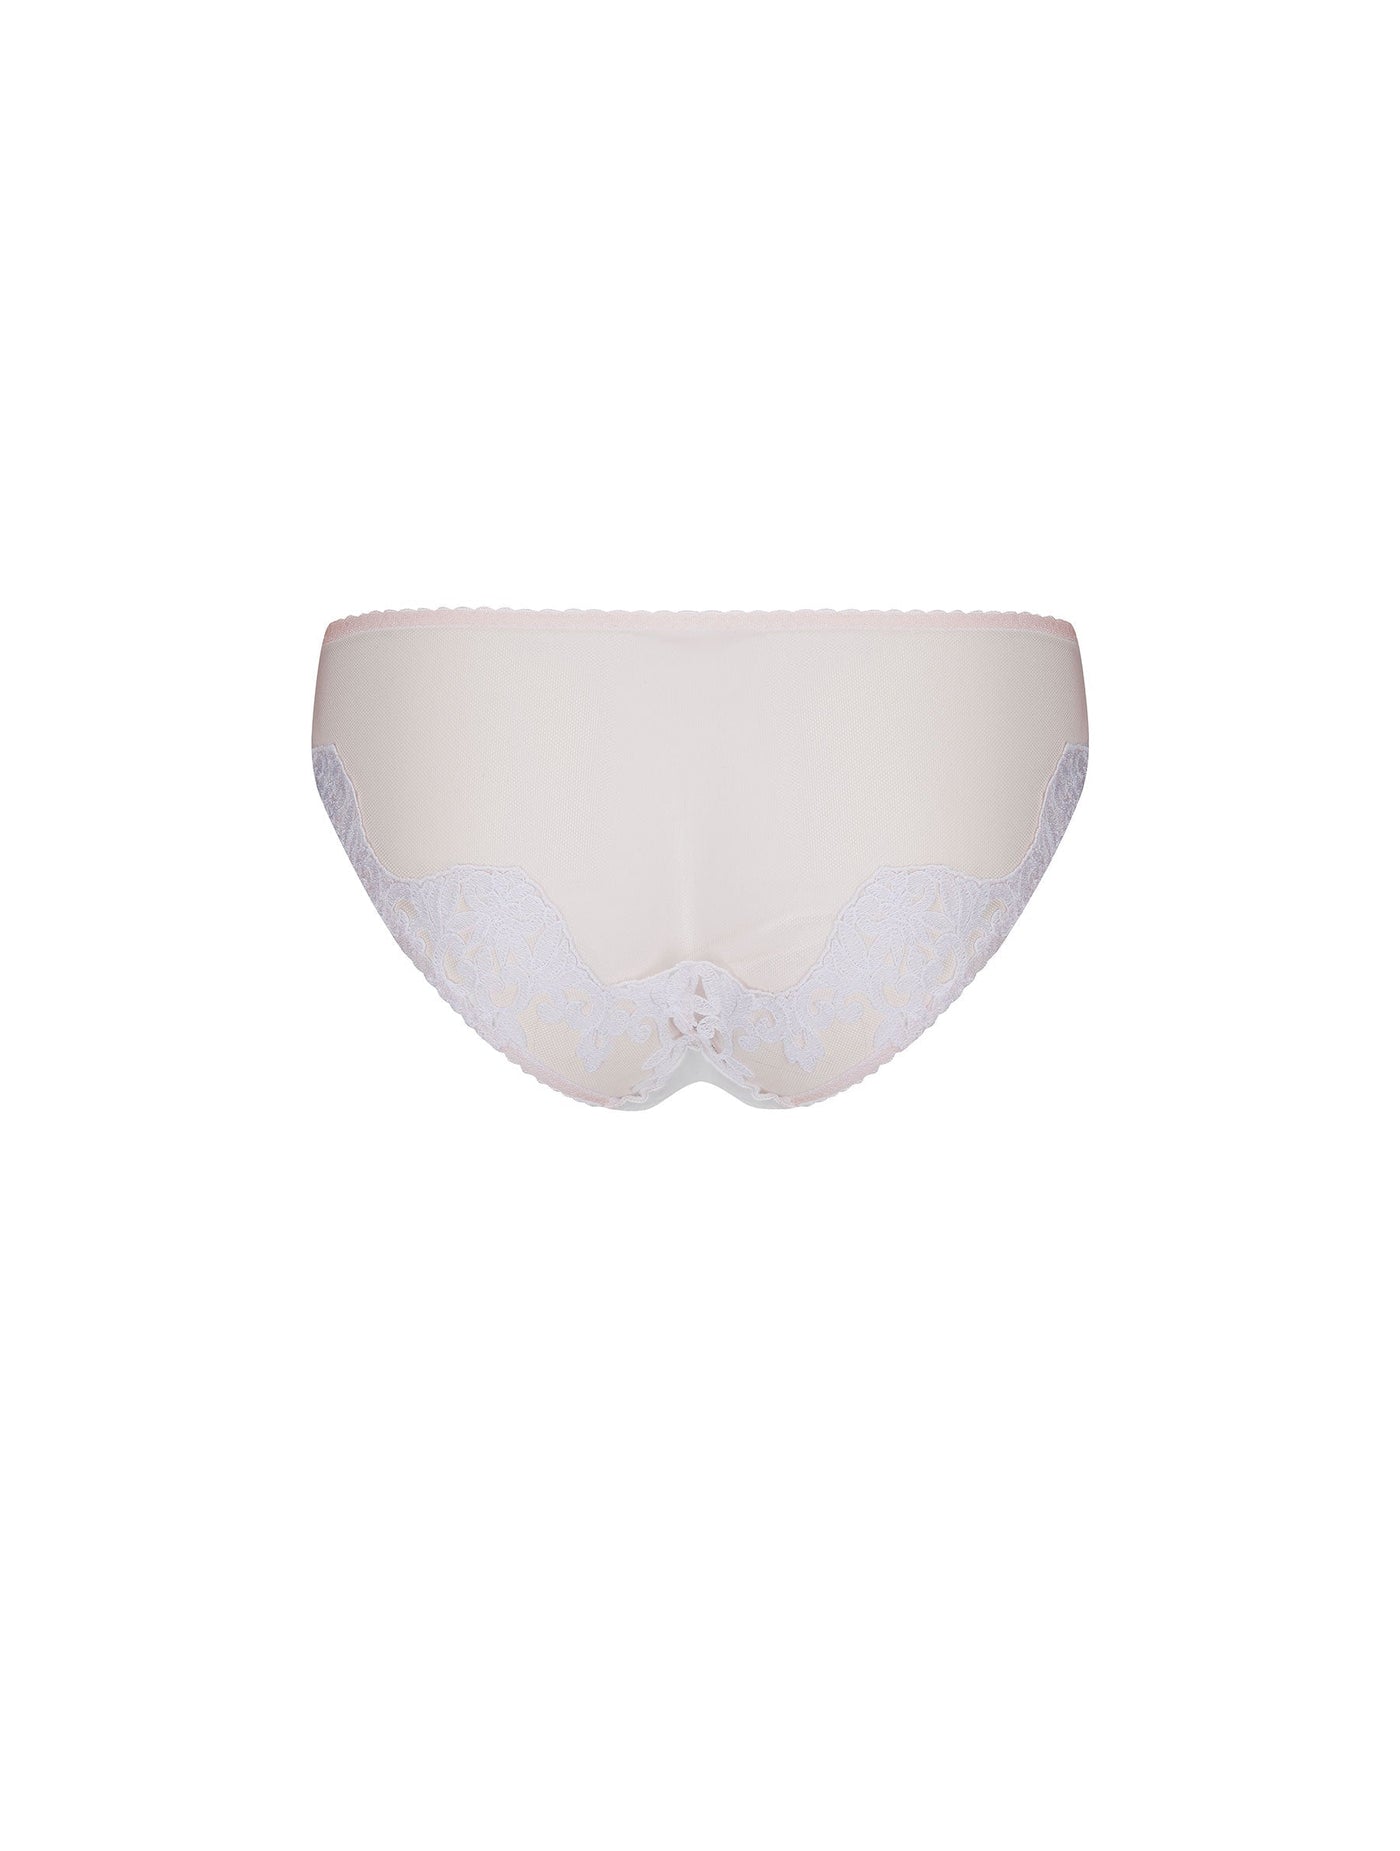 Fleur of England Aria Embroidered Brief